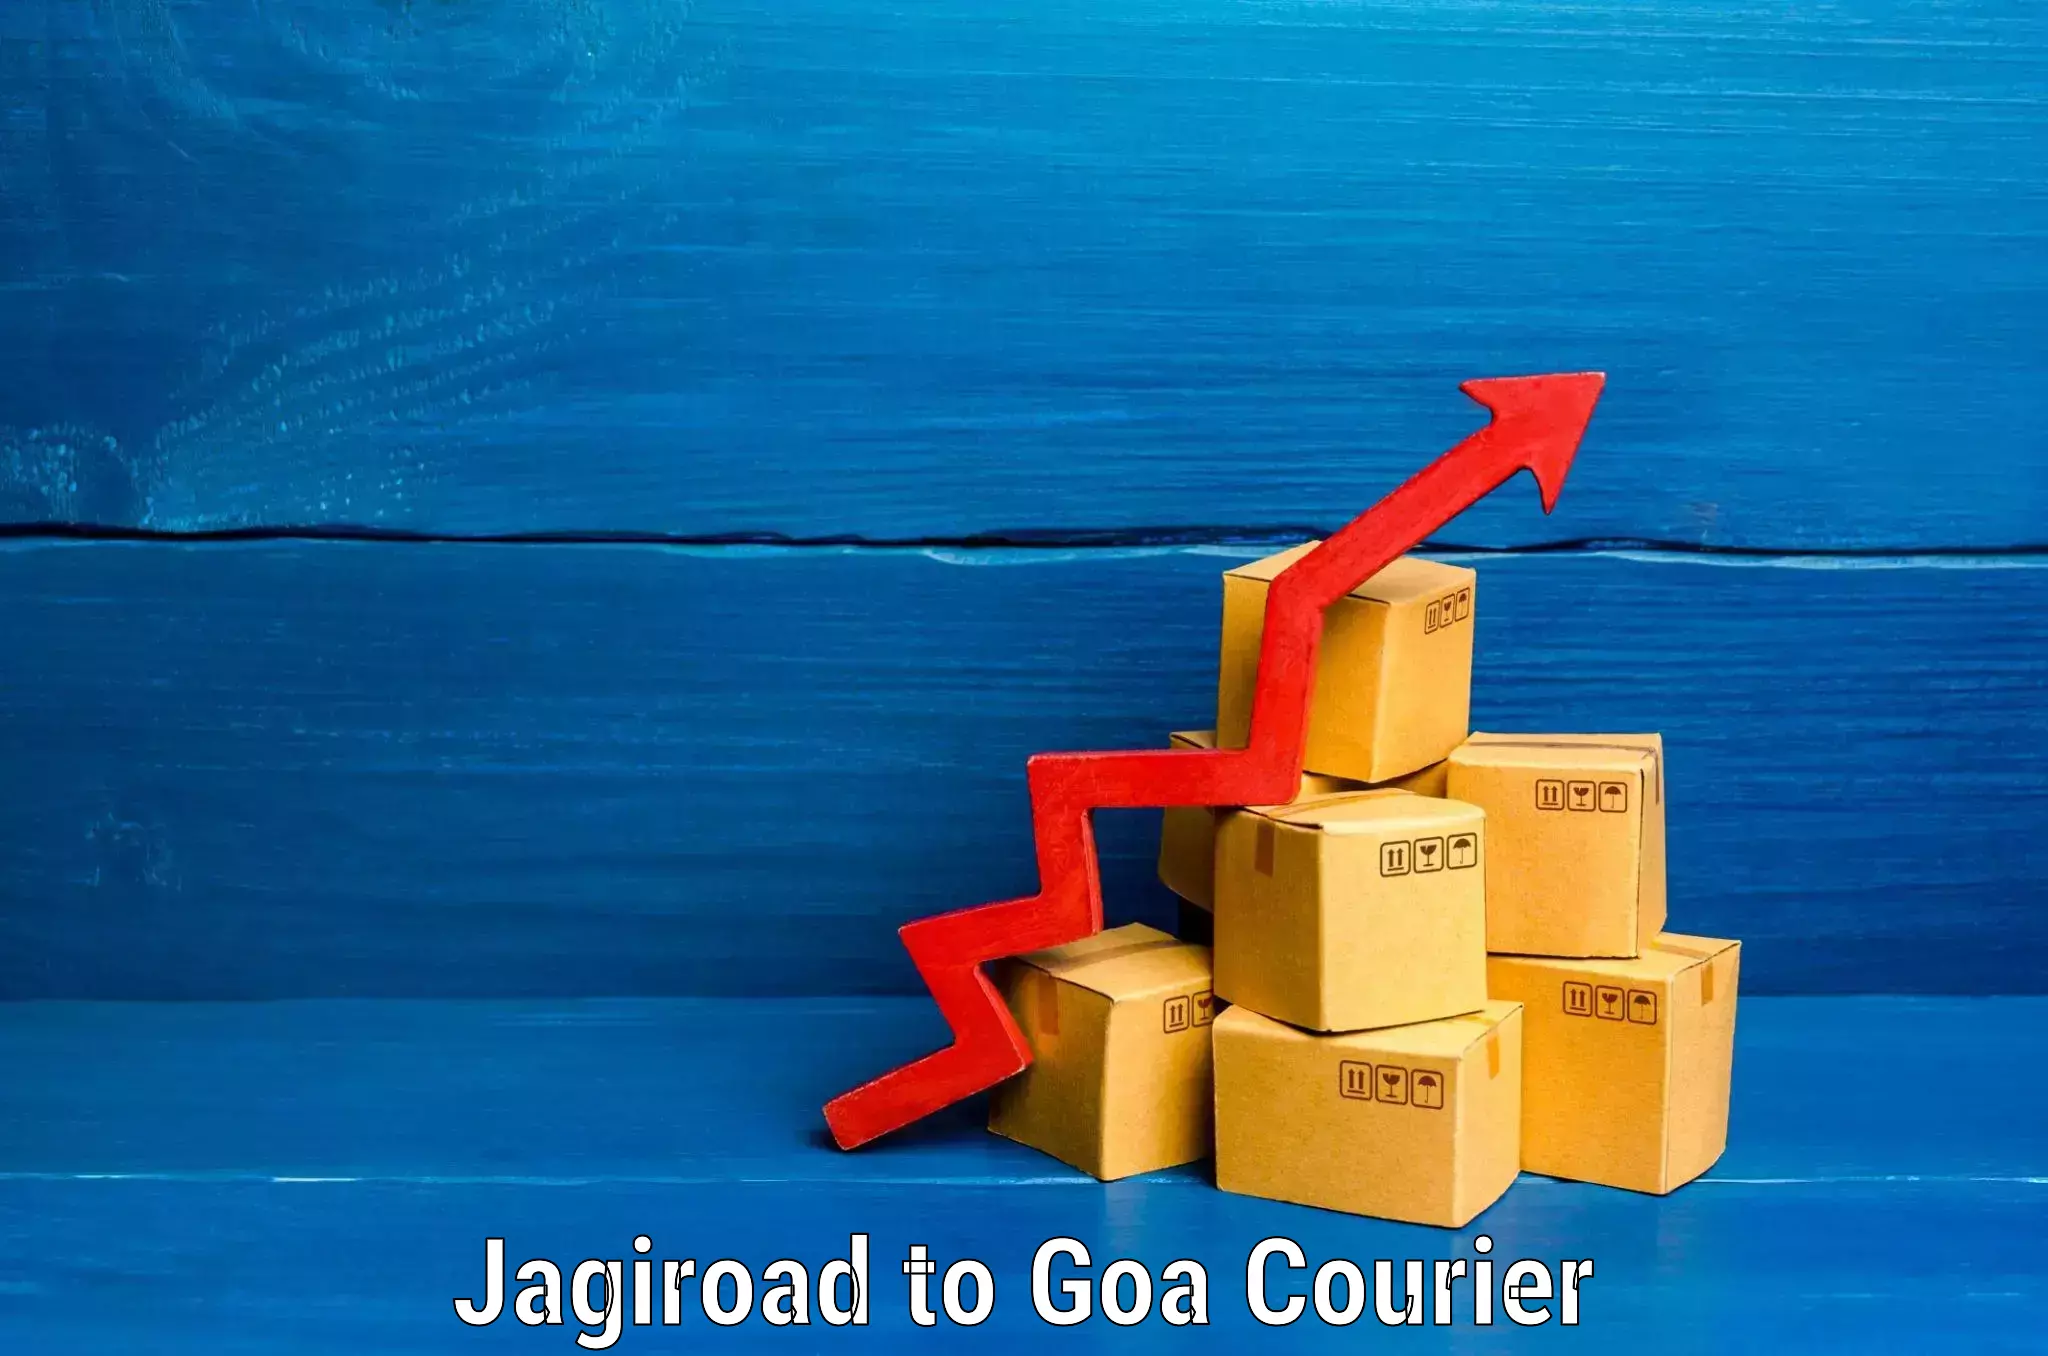 Luggage shipment specialists Jagiroad to Goa